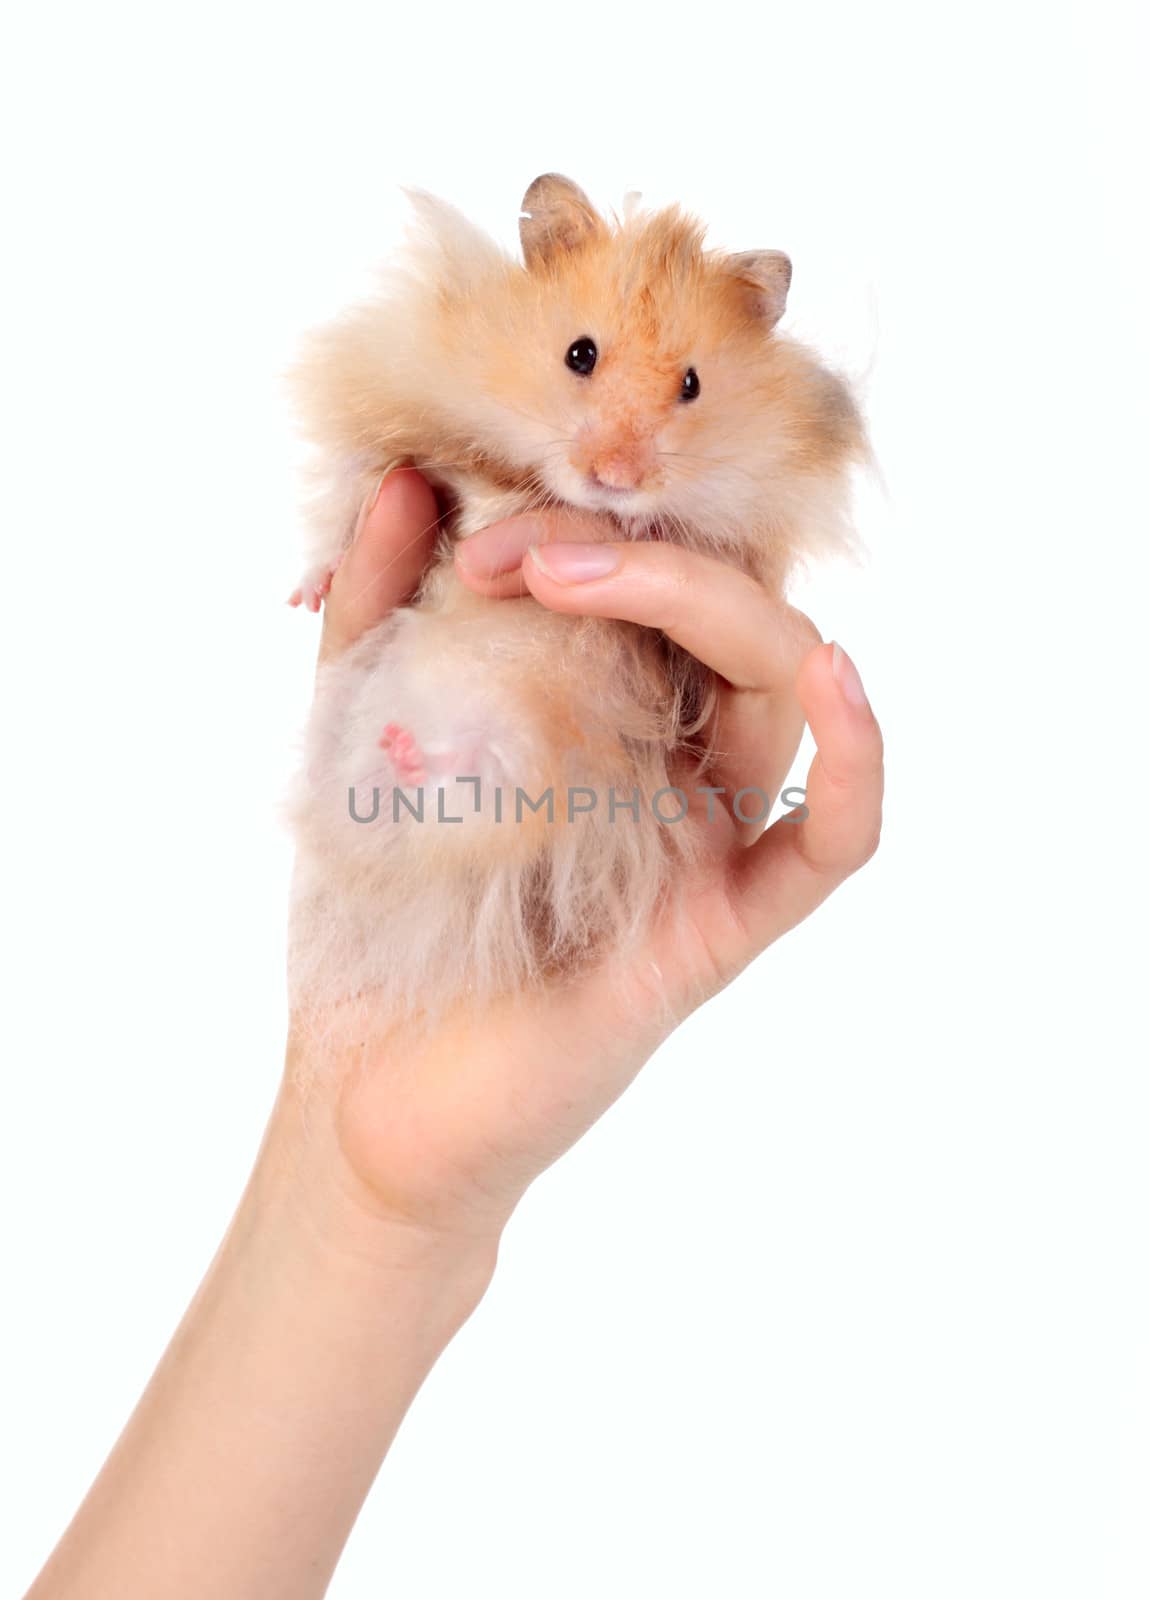 Funny hamster in the hand by dedmorozz